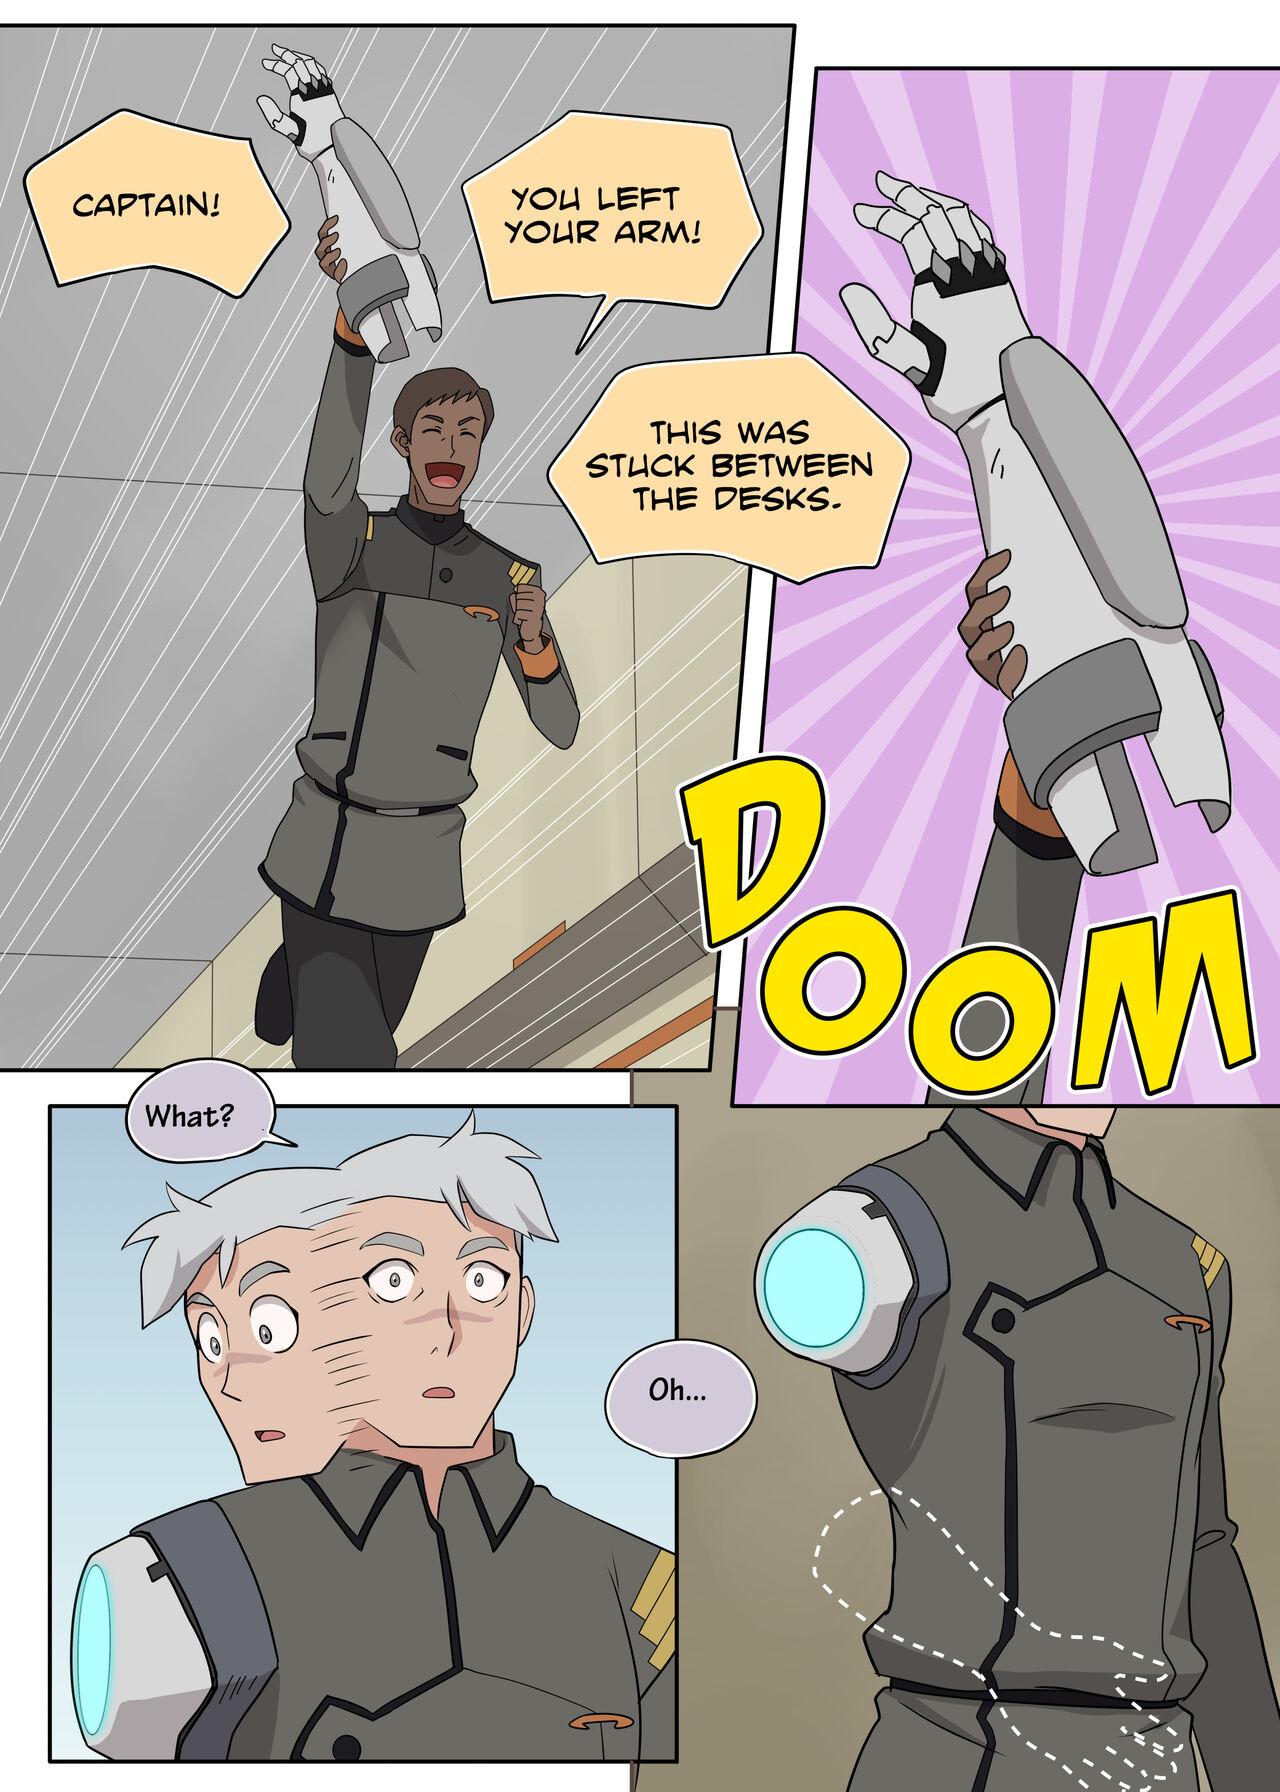 Public Nudity Captain, You’re so CUTE! - Voltron American - Page 4